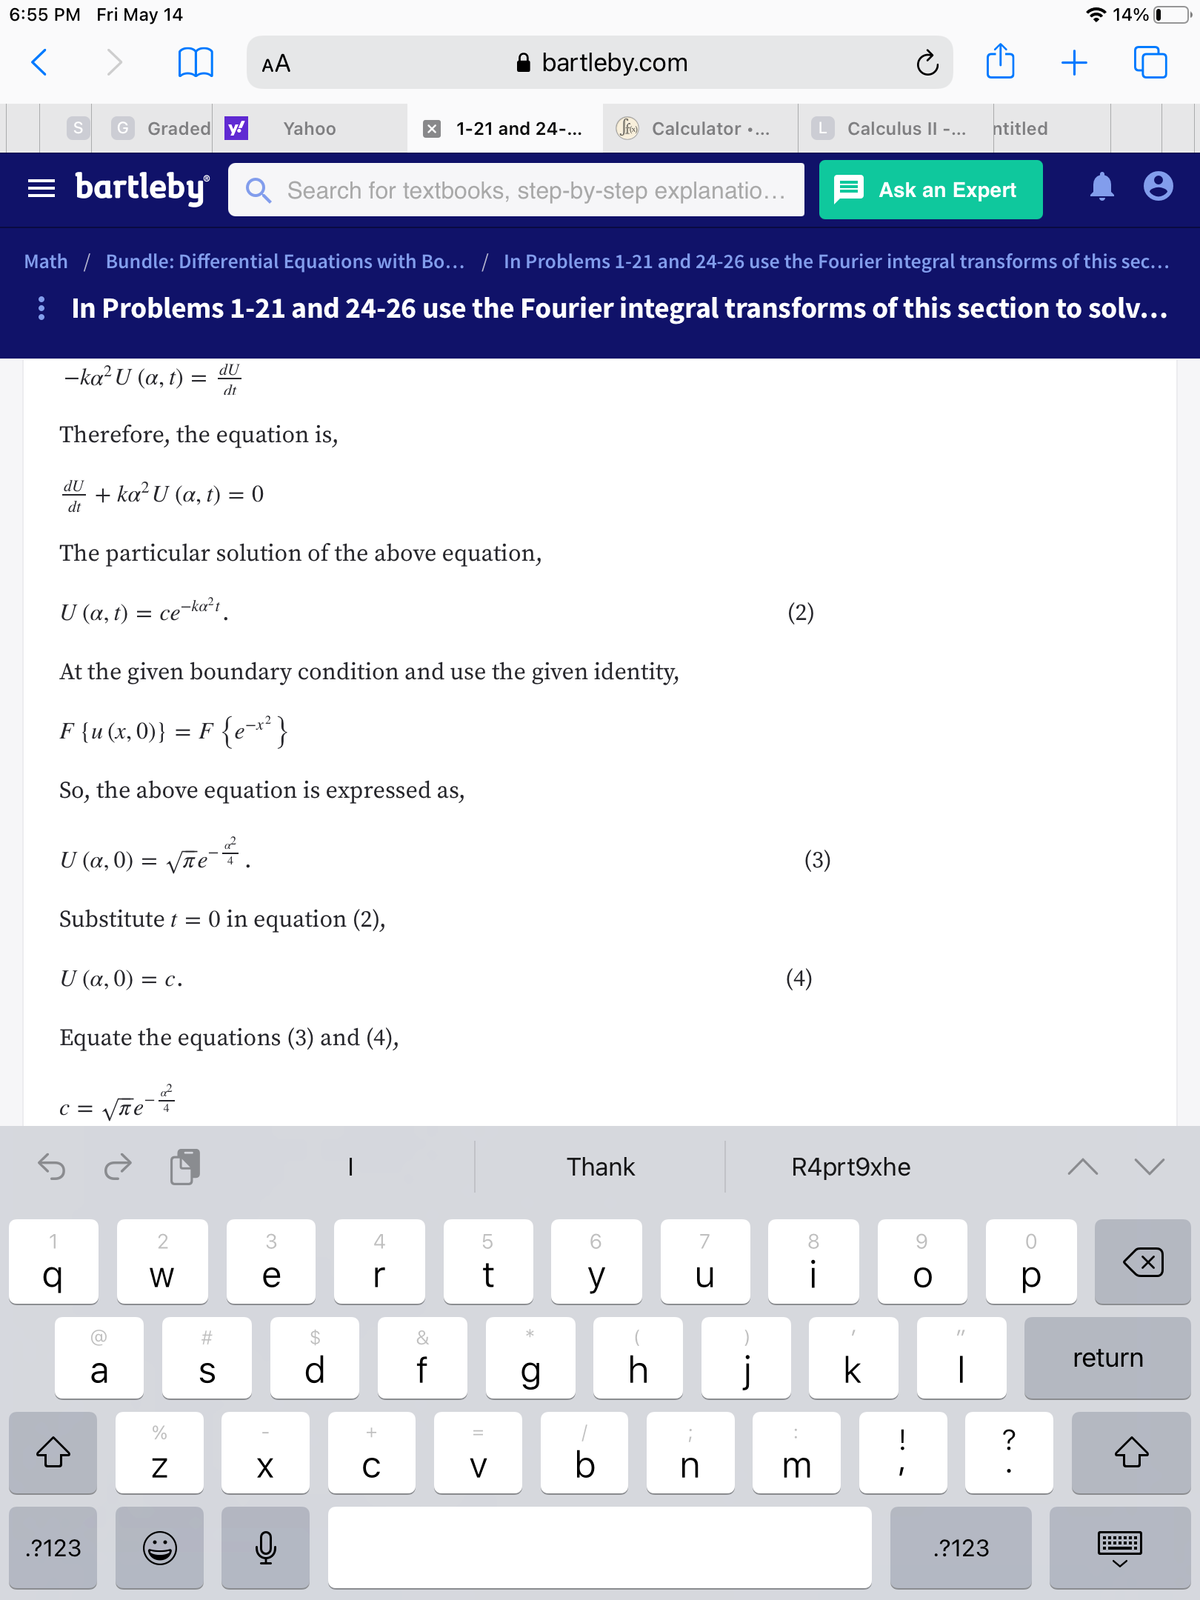 6:55 PM Fri May 14
* 14% 0
AA
A bartleby.com
G
Graded y!
Yahoo
1-21 and 24...
Sfo Calculator •...
Calculus II -...
ntitled
= bartleby Q Search for textbooks, step-by-step explanatio...
Ask an Expert
Math / Bundle: Differential Equations with Bo... / In Problems 1-21 and 24-26 use the Fourier integral transforms of this sec...
: In Problems 1-21 and 24-26 use the Fourier integral transforms of this section to solv...
-ka U (a, t) =
dU
dt
Therefore, the equation is,
dU
+ ka? U (a, t) = 0
dt
The particular solution of the above equation,
U (a, t) = ce¬ka²i.
(2)
At the given boundary condition and use the given identity,
F {u (x, 0)} = F {ex*}
So, the above equation is expressed as,
U (α, 0)
Vñe .
(3)
Substitute t =
O in equation (2),
U α, 0)
(4)
= C.
Equate the equations (3) and (4),
c = Vãe?
|
Thank
R4prt9xhe
2
4
7
8.
W
e
r
t
y
u
i
p
%23
&
return
a
S
f
g
j
k
|
?
V
m
.?123
.?123
LO
N
:)
